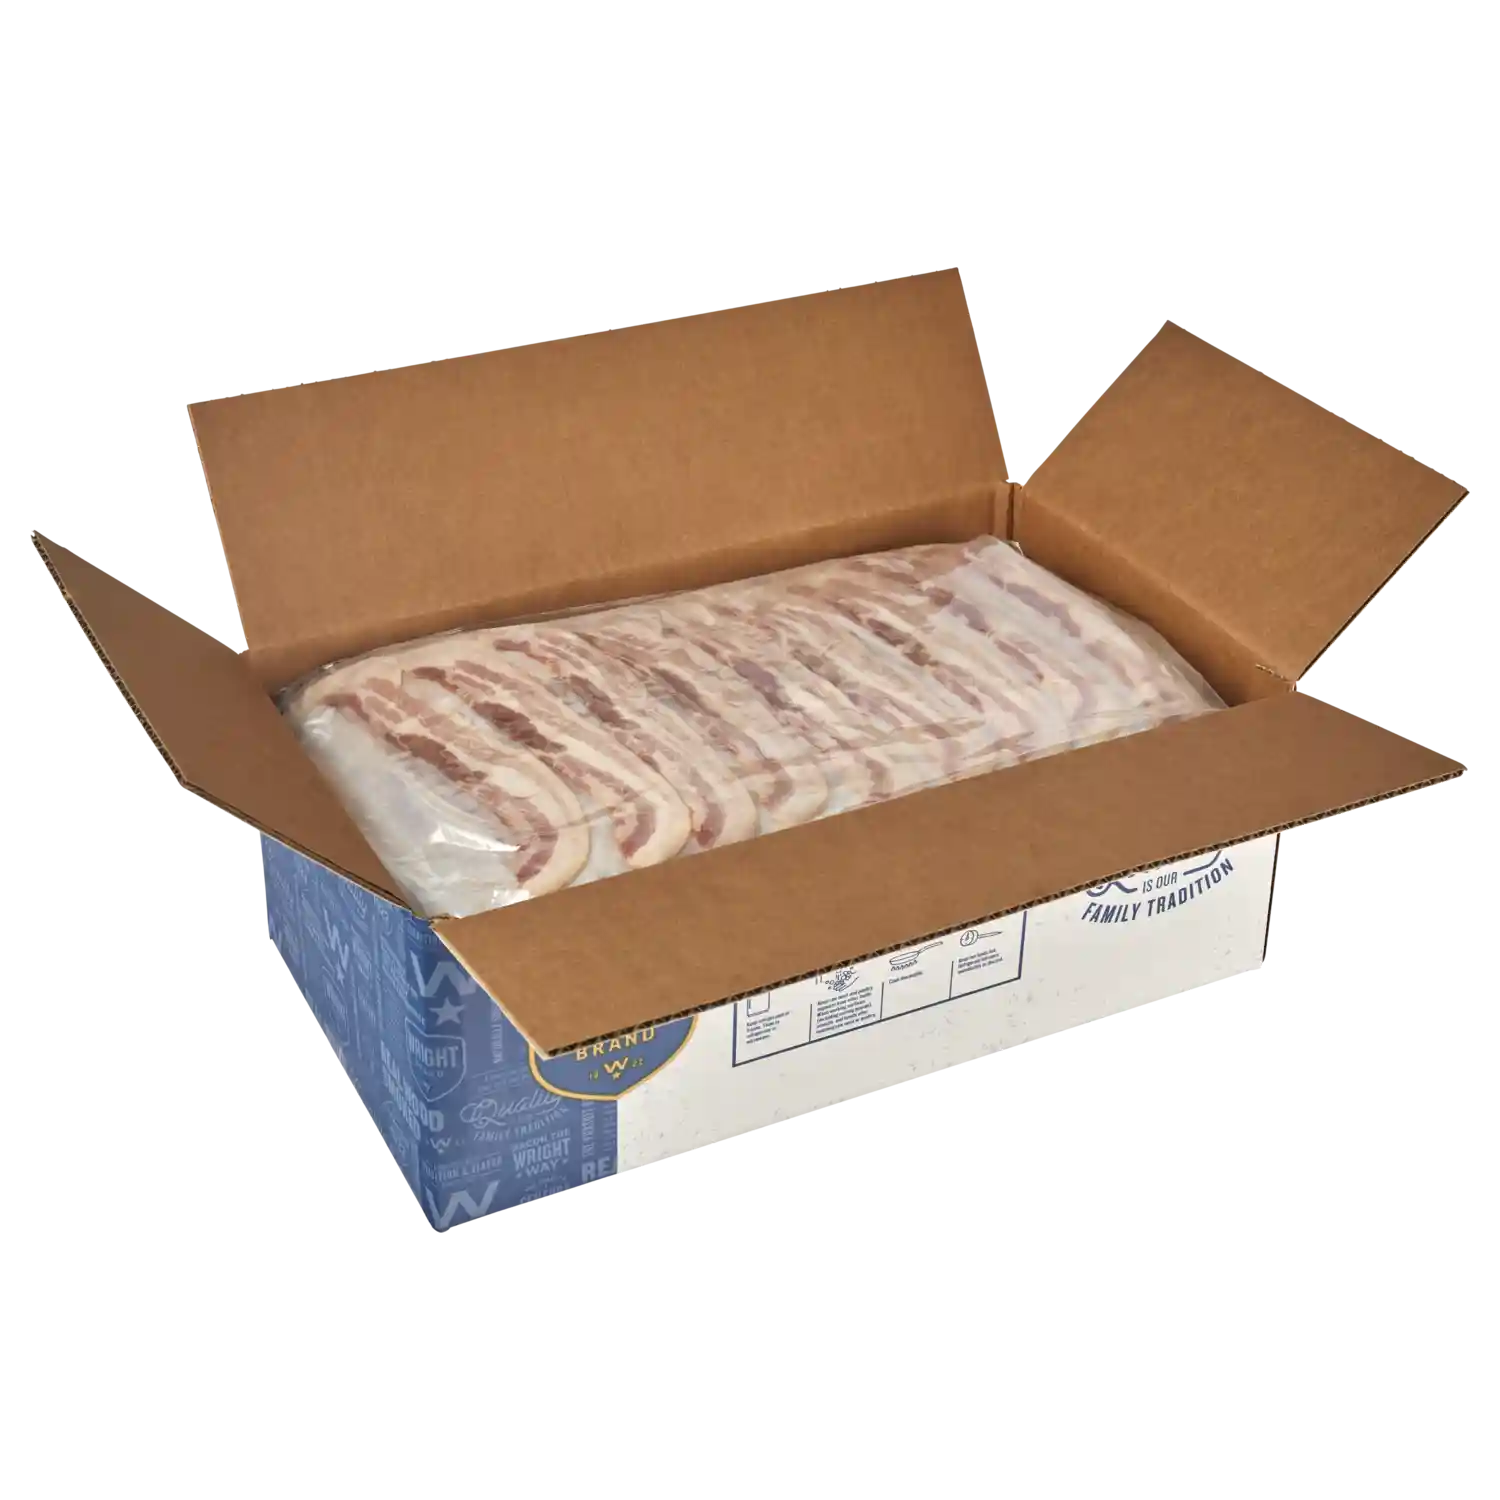 Wright® Brand Naturally Hickory Smoked Thick Sliced Bacon, Flat-Pack®, 15 Lbs, 10-14 Slices per Pound, Gas Flushed_image_21